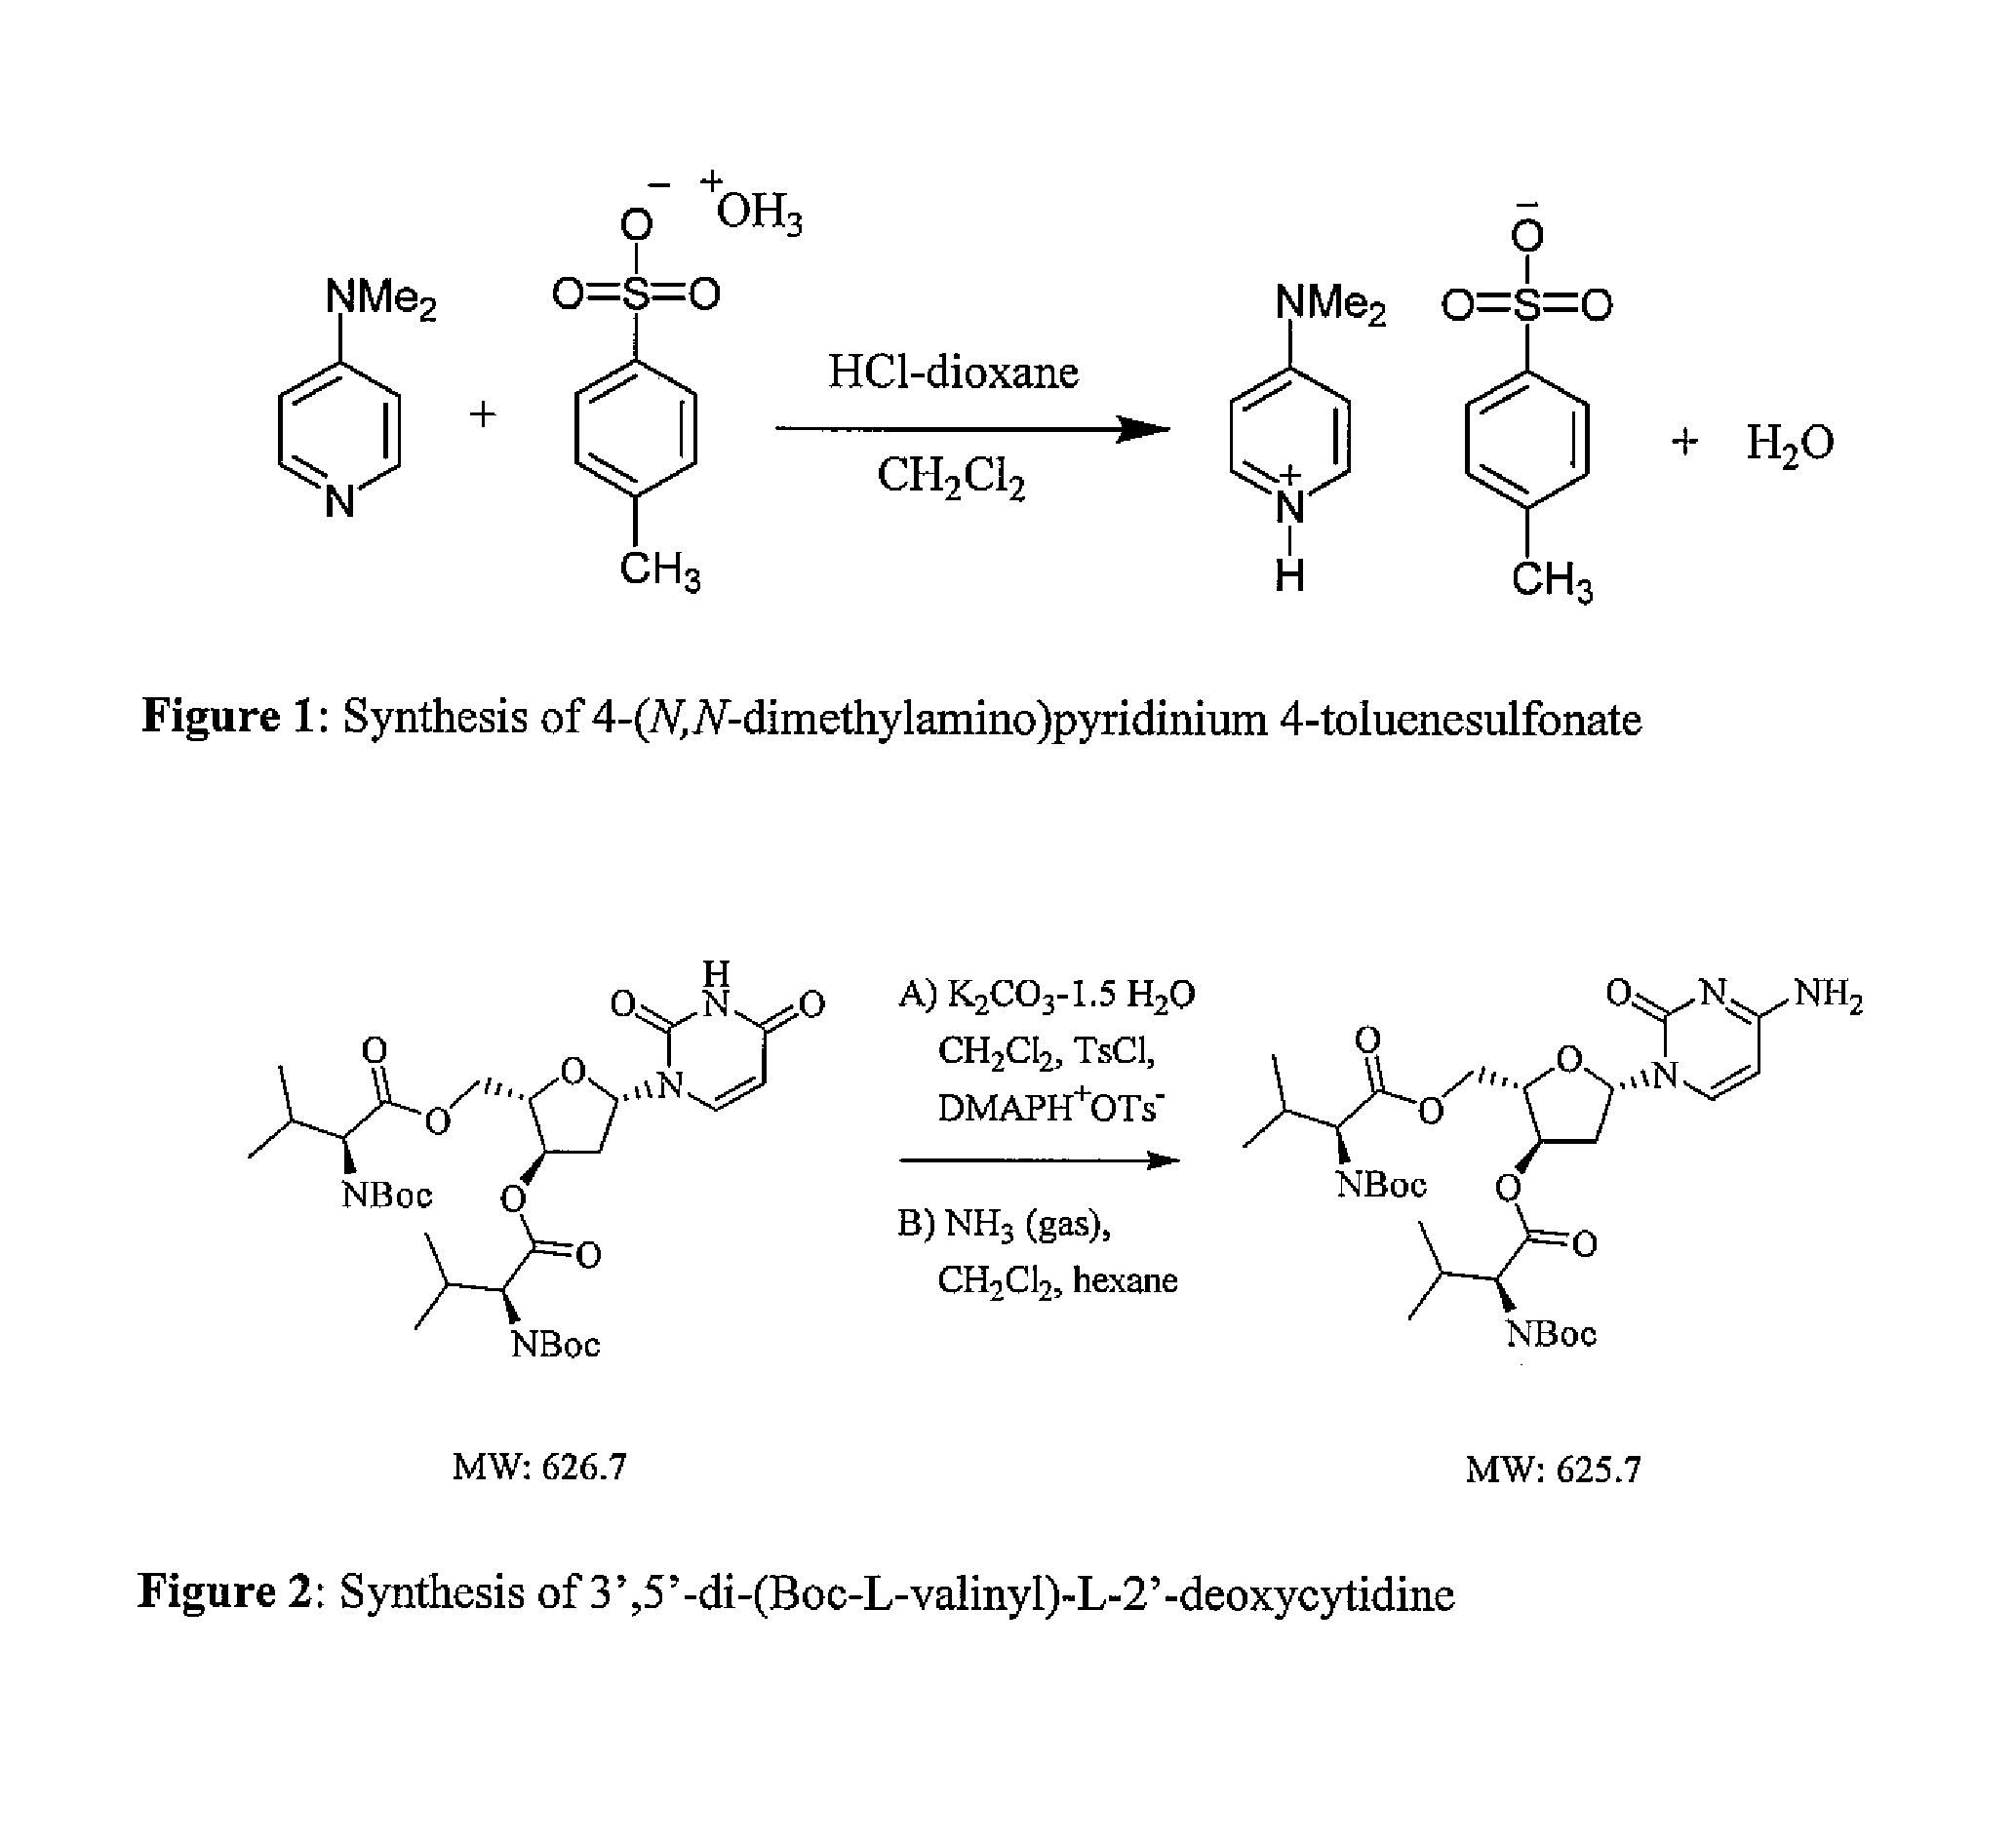 Methods of manufacture of 2'-deoxy-beta-L-nucleosides